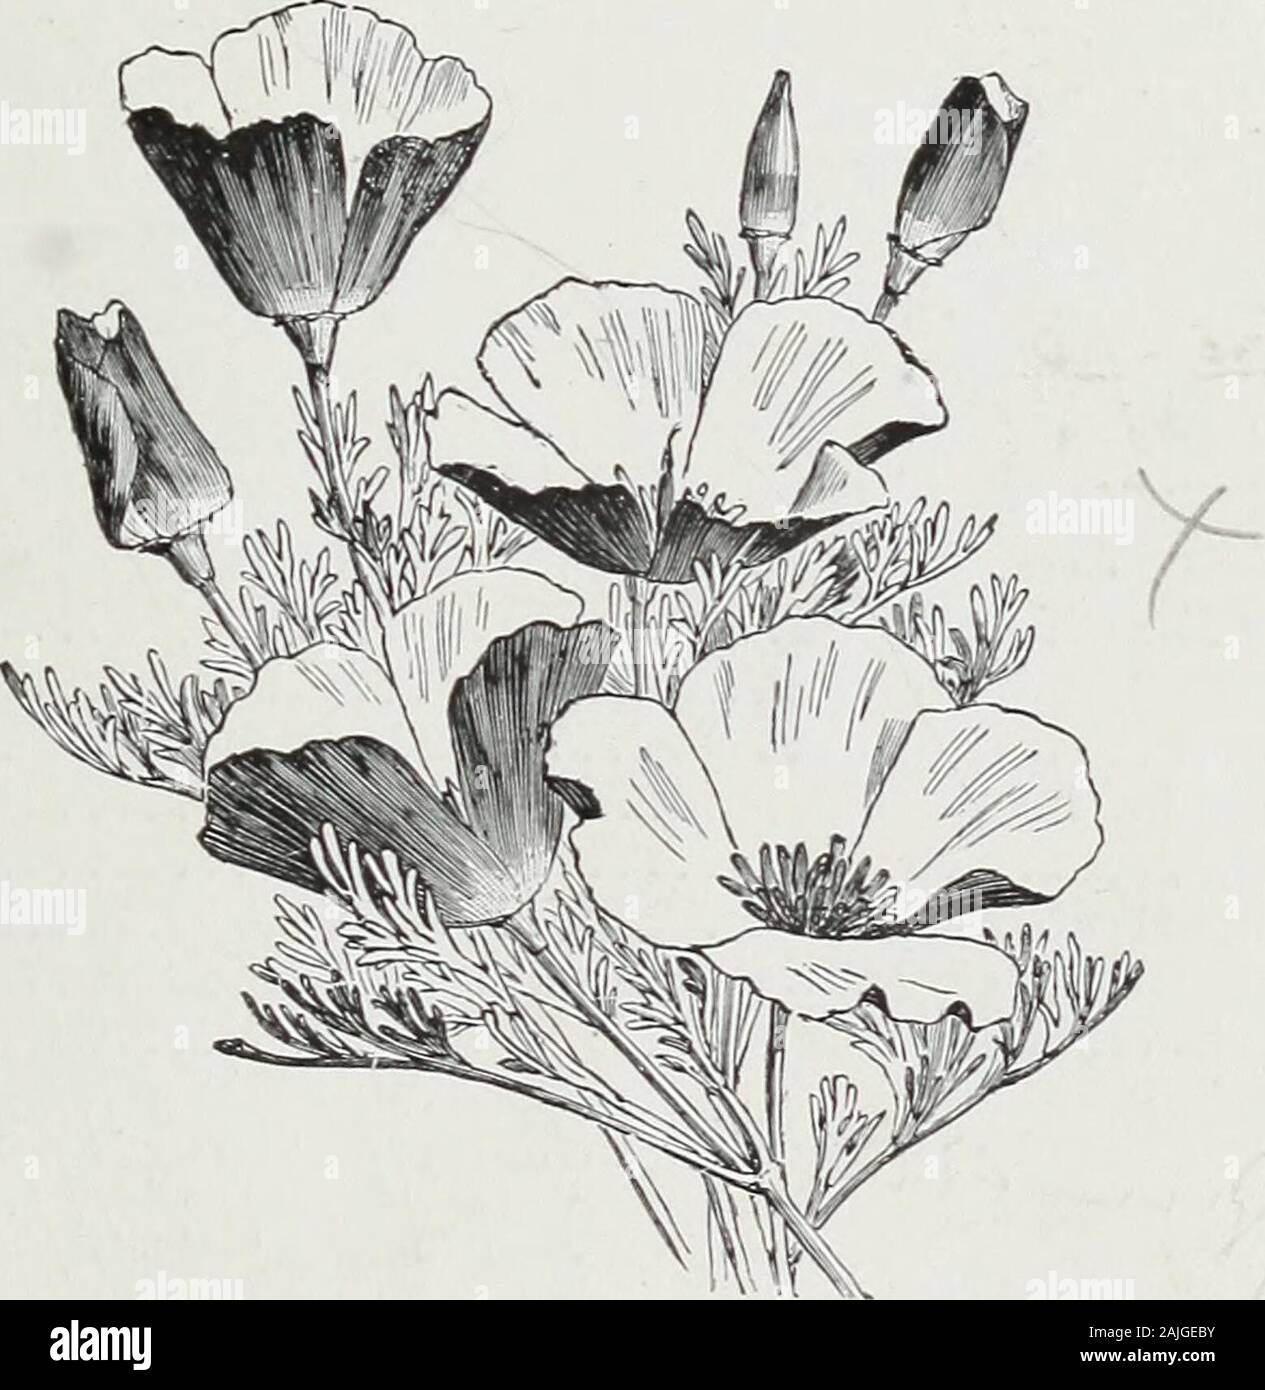 D M Ferry & Co.'s wholesale list of seeds for 1891 . 605060—60—5025000025505050 If 4 00 1 25 QJ 40 S; / fr.t D. M. FERRY & CO S WHOLESALE PRICE LIST. 37 PER OZ. PER LB Cypress Vine, scarlet, (Ipormea quamoclit) white * . mixed Dahlia, finest double mixed A .... Daisy, double white, extra 2-,V.Q $yi& red, (Longfellow), finest strain *7.v? .6. mixed, finest quality fafi. Datura Wrighti, pure white chlorantha fl. pi., double yellow fastuosa alba, double, pure white Eschscholtzia Californica, bright yellow, (California Poppy crocea, double white, striped, mixed, finest colors,. Stock Photo